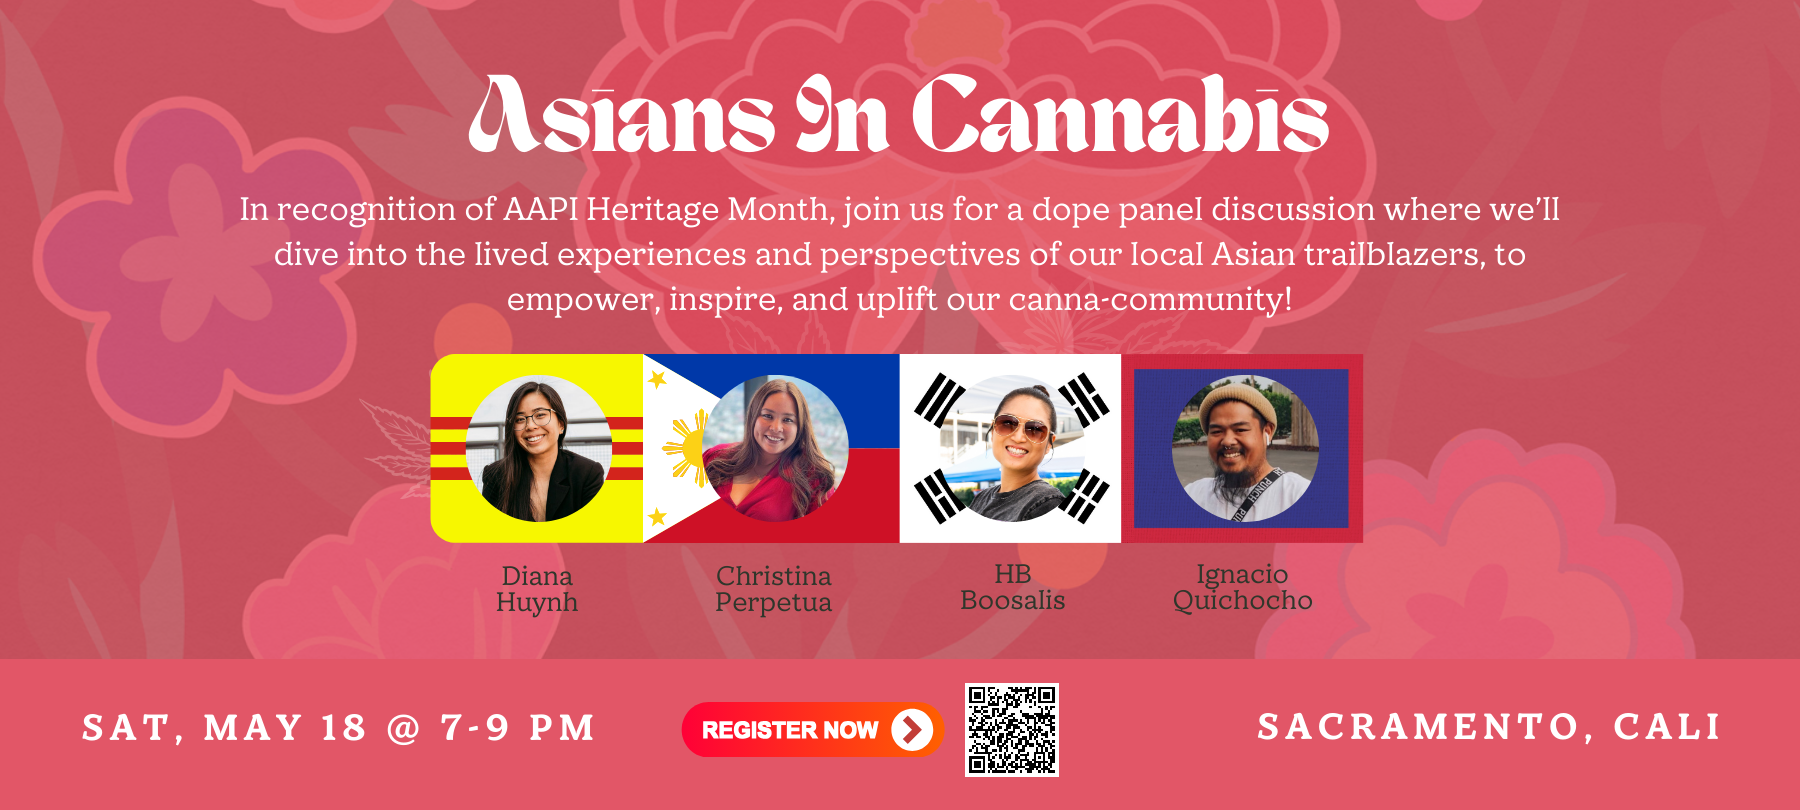 Join us at the Wonderful Cafe and Restaurant for an exciting gathering of like-minded individuals passionate about cannabis. This in-person event is a great opportunity to network, learn, and celebrate Asians in the cannabis industry.